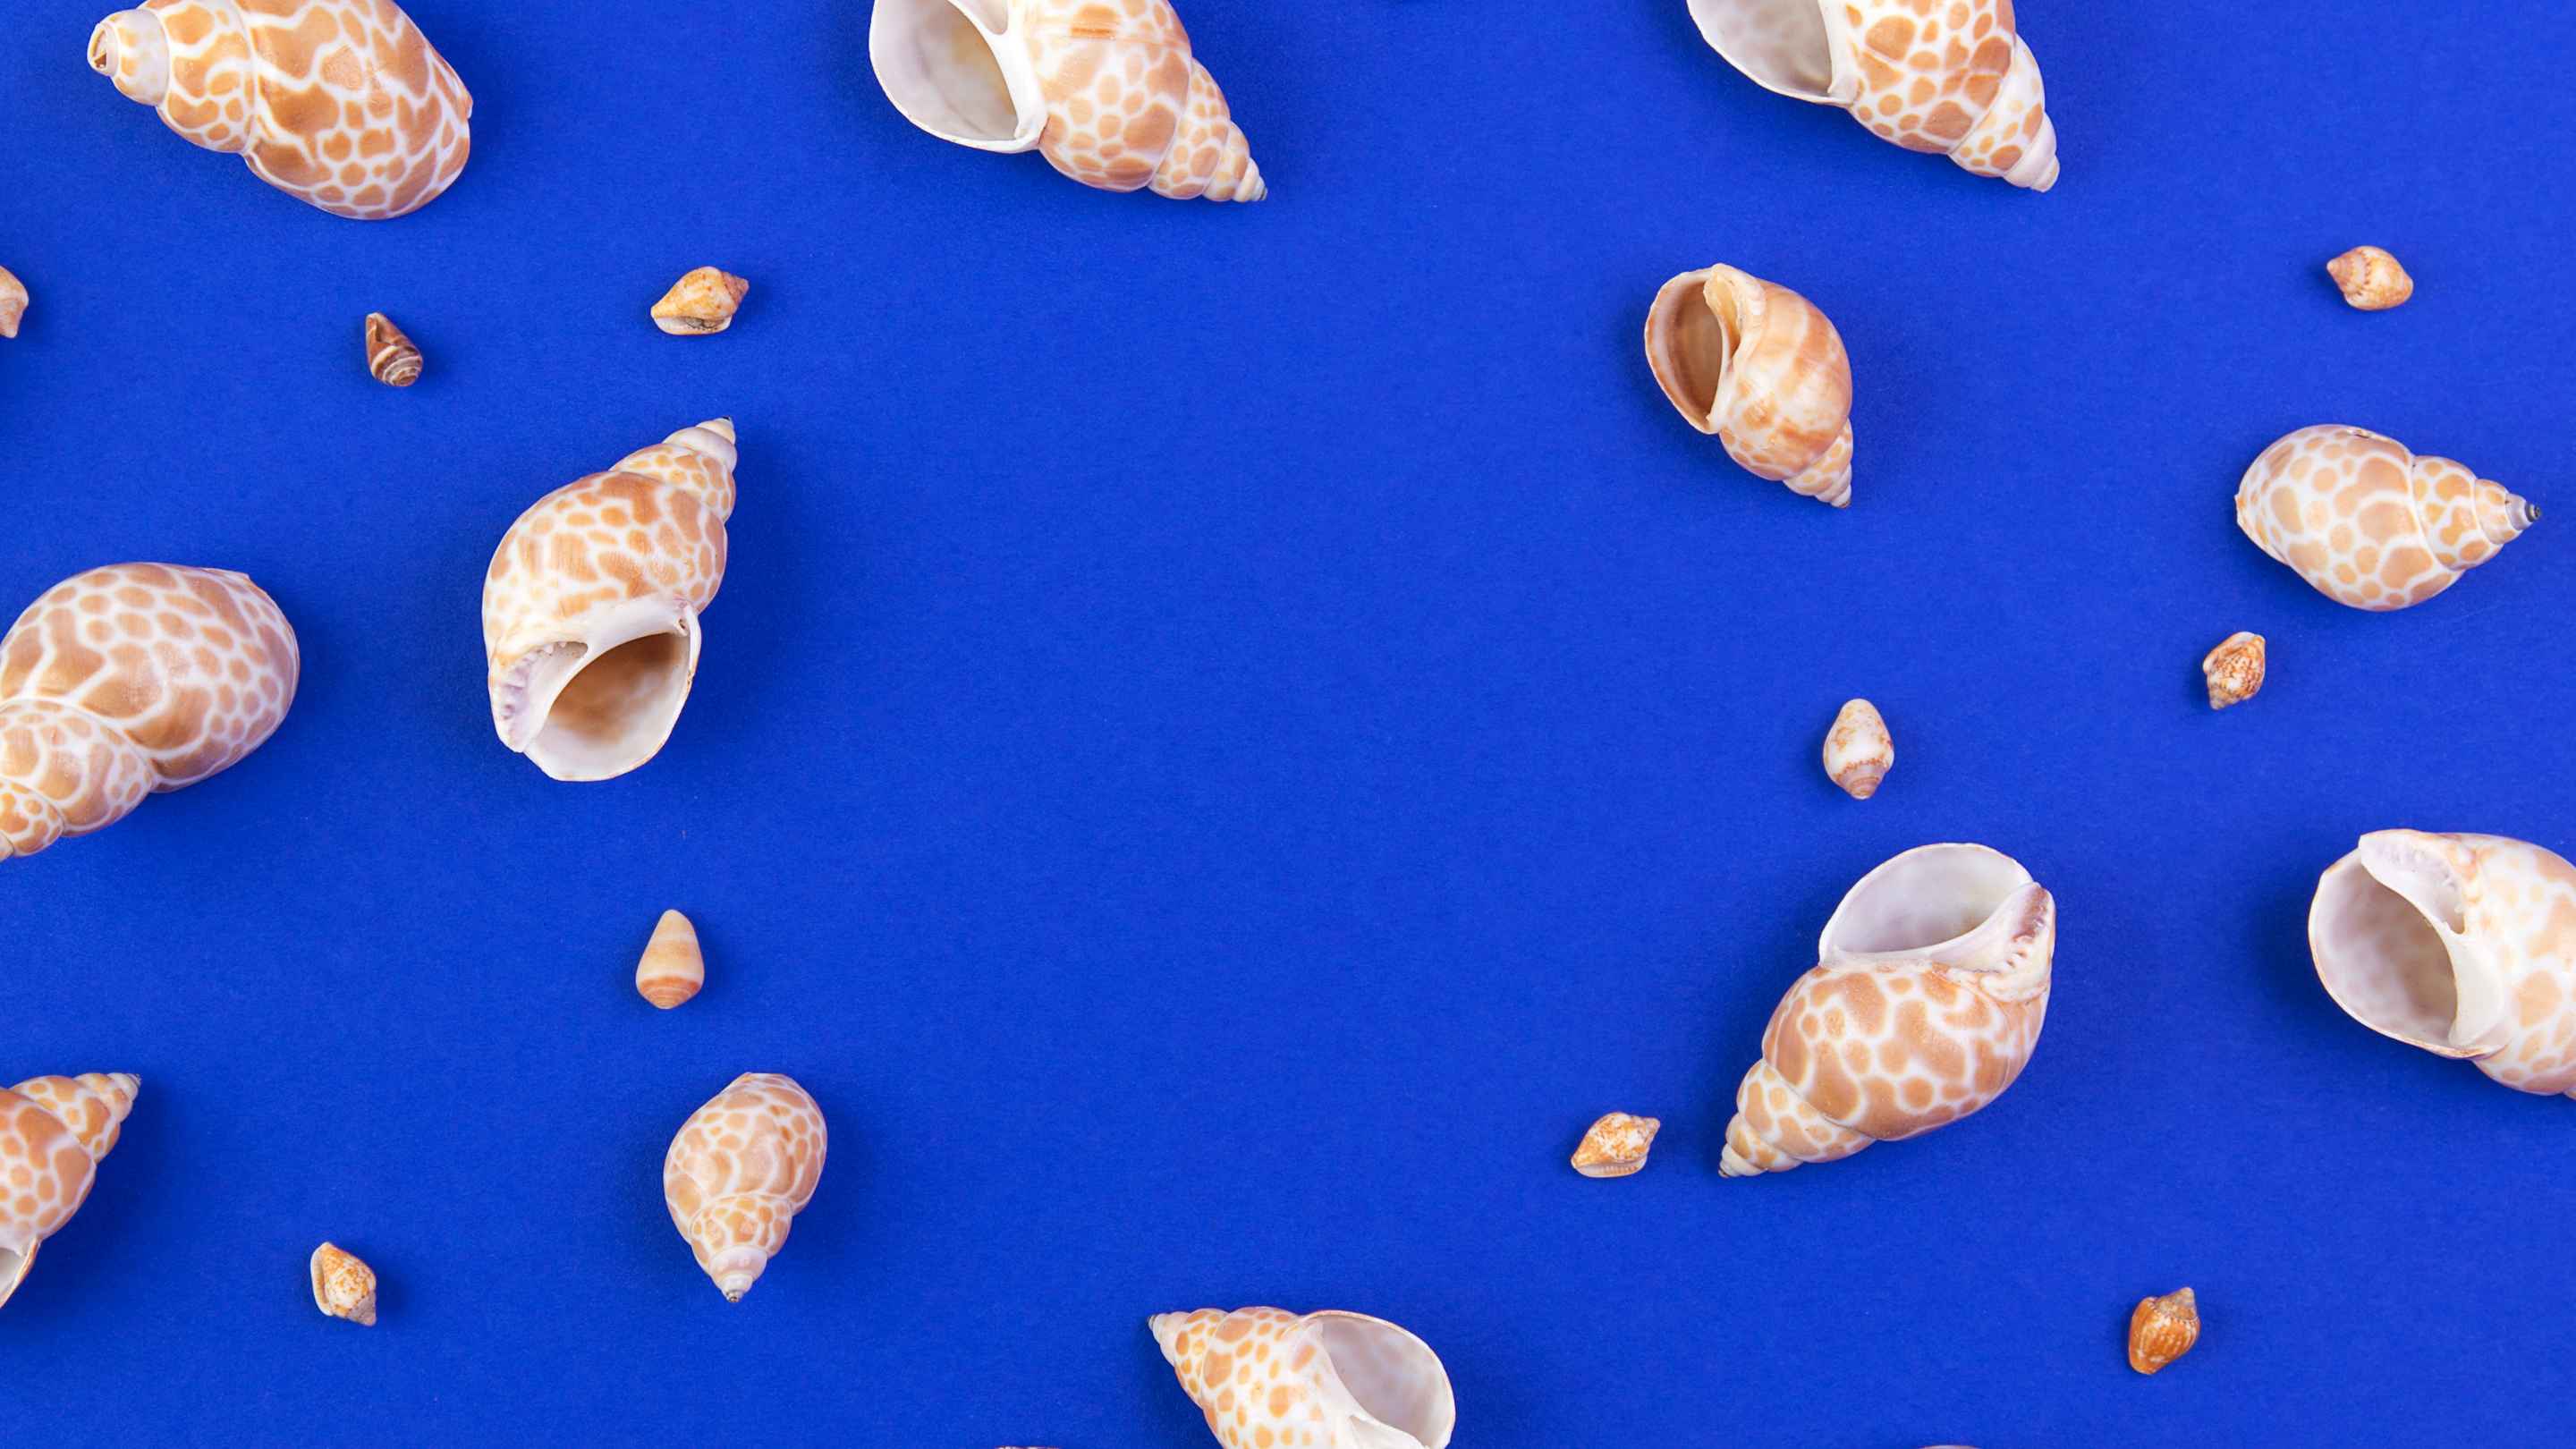 Deep blue background with shells.